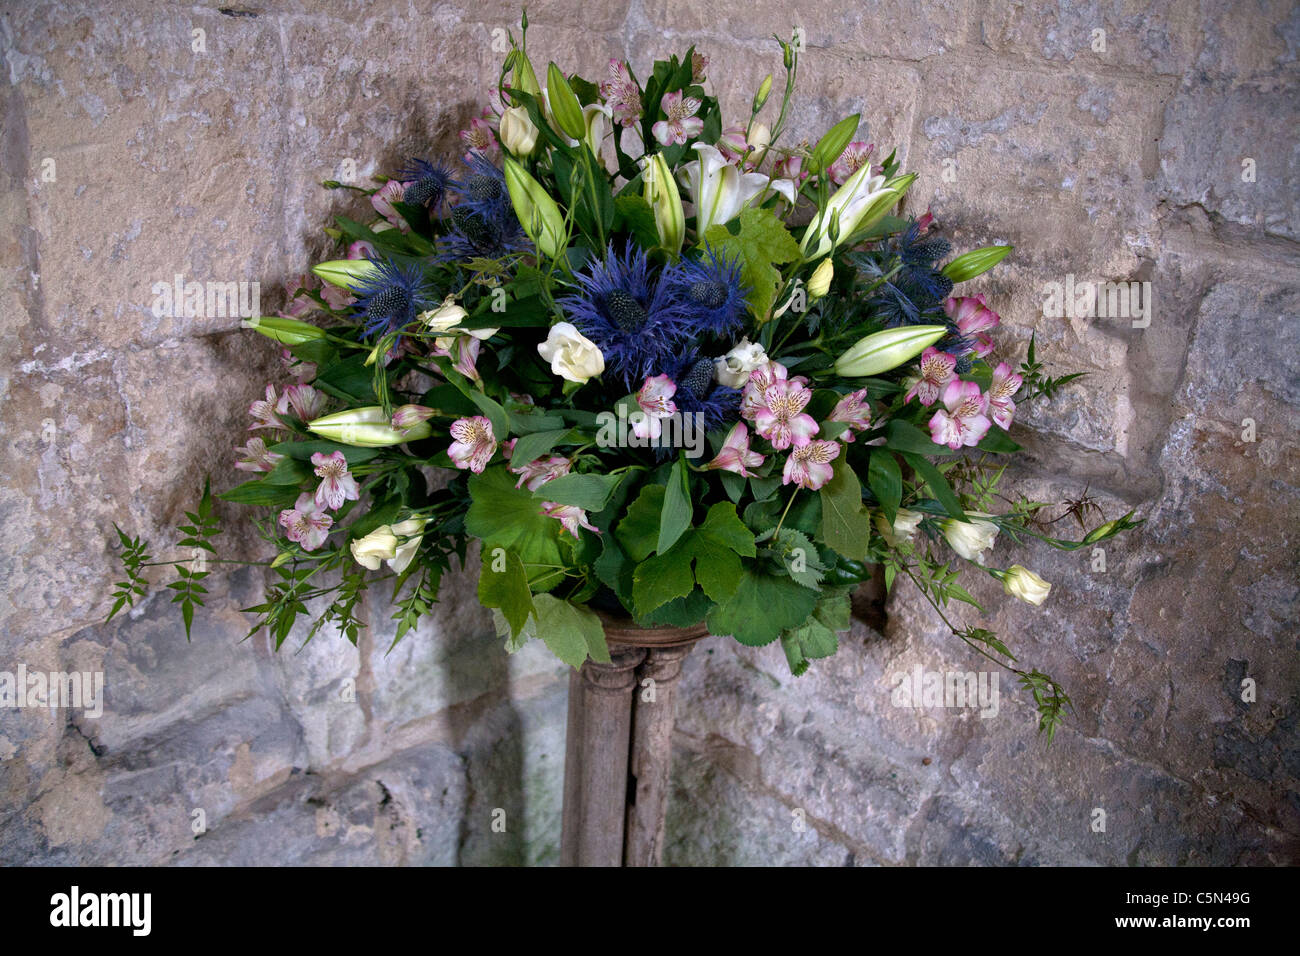 Artificial Flower Display High Resolution Stock Photography And Images Alamy